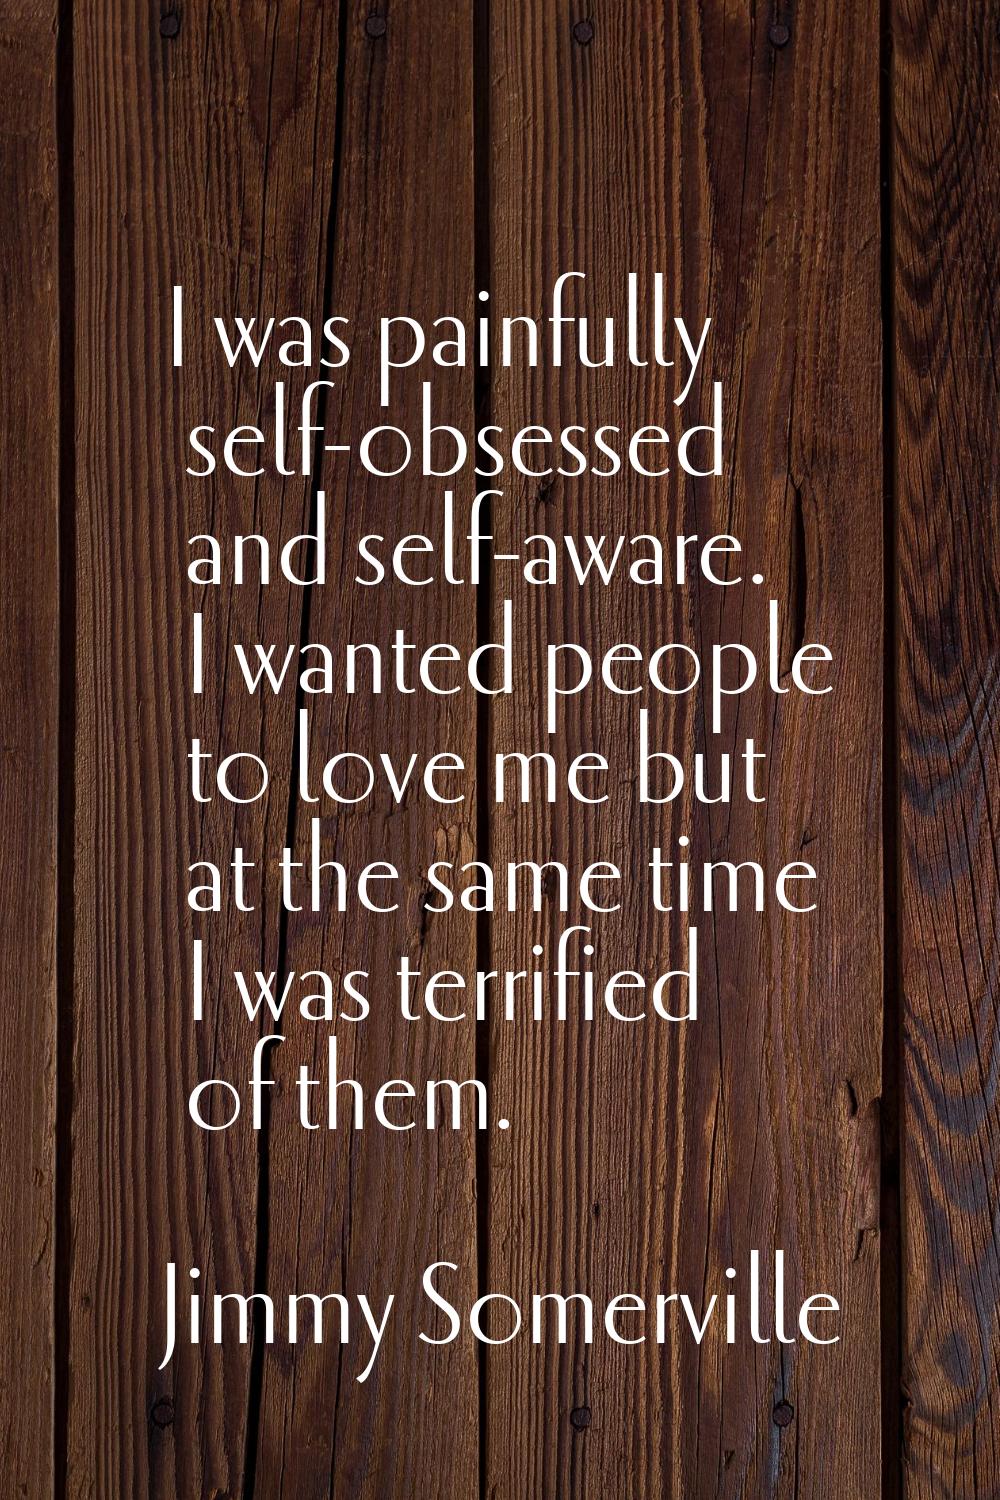 I was painfully self-obsessed and self-aware. I wanted people to love me but at the same time I was